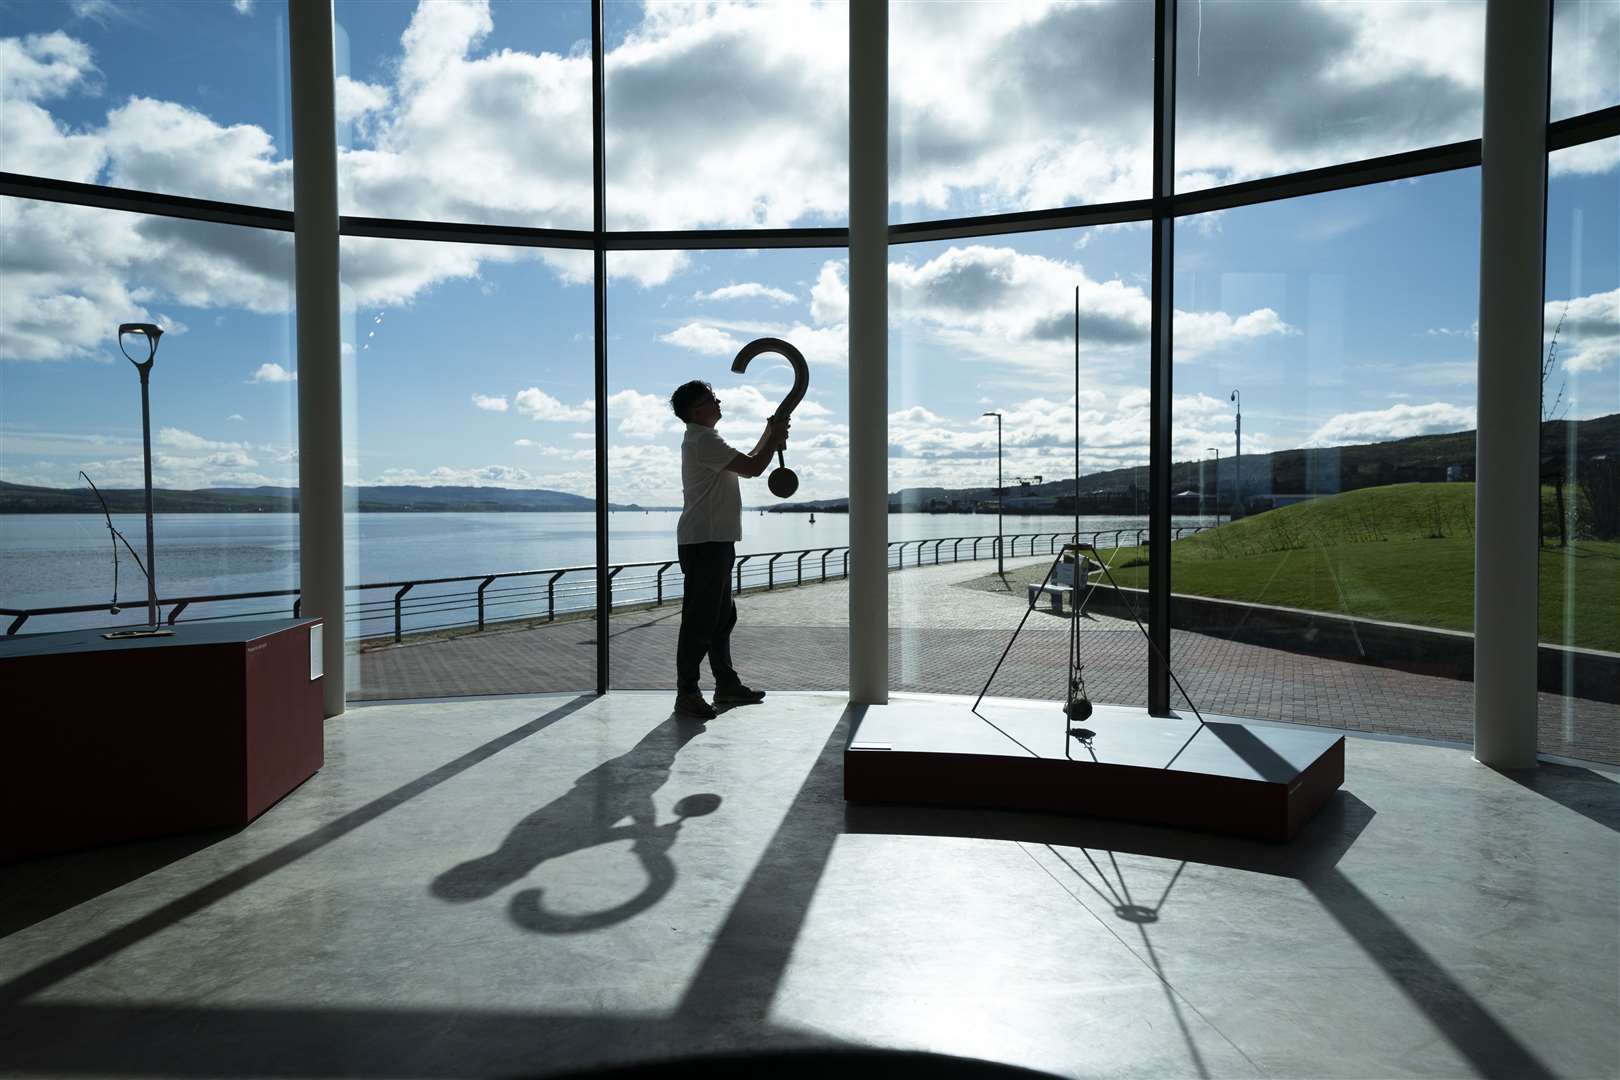 The museum is situated on the banks of the River Clyde (Jane Barlow/PA)